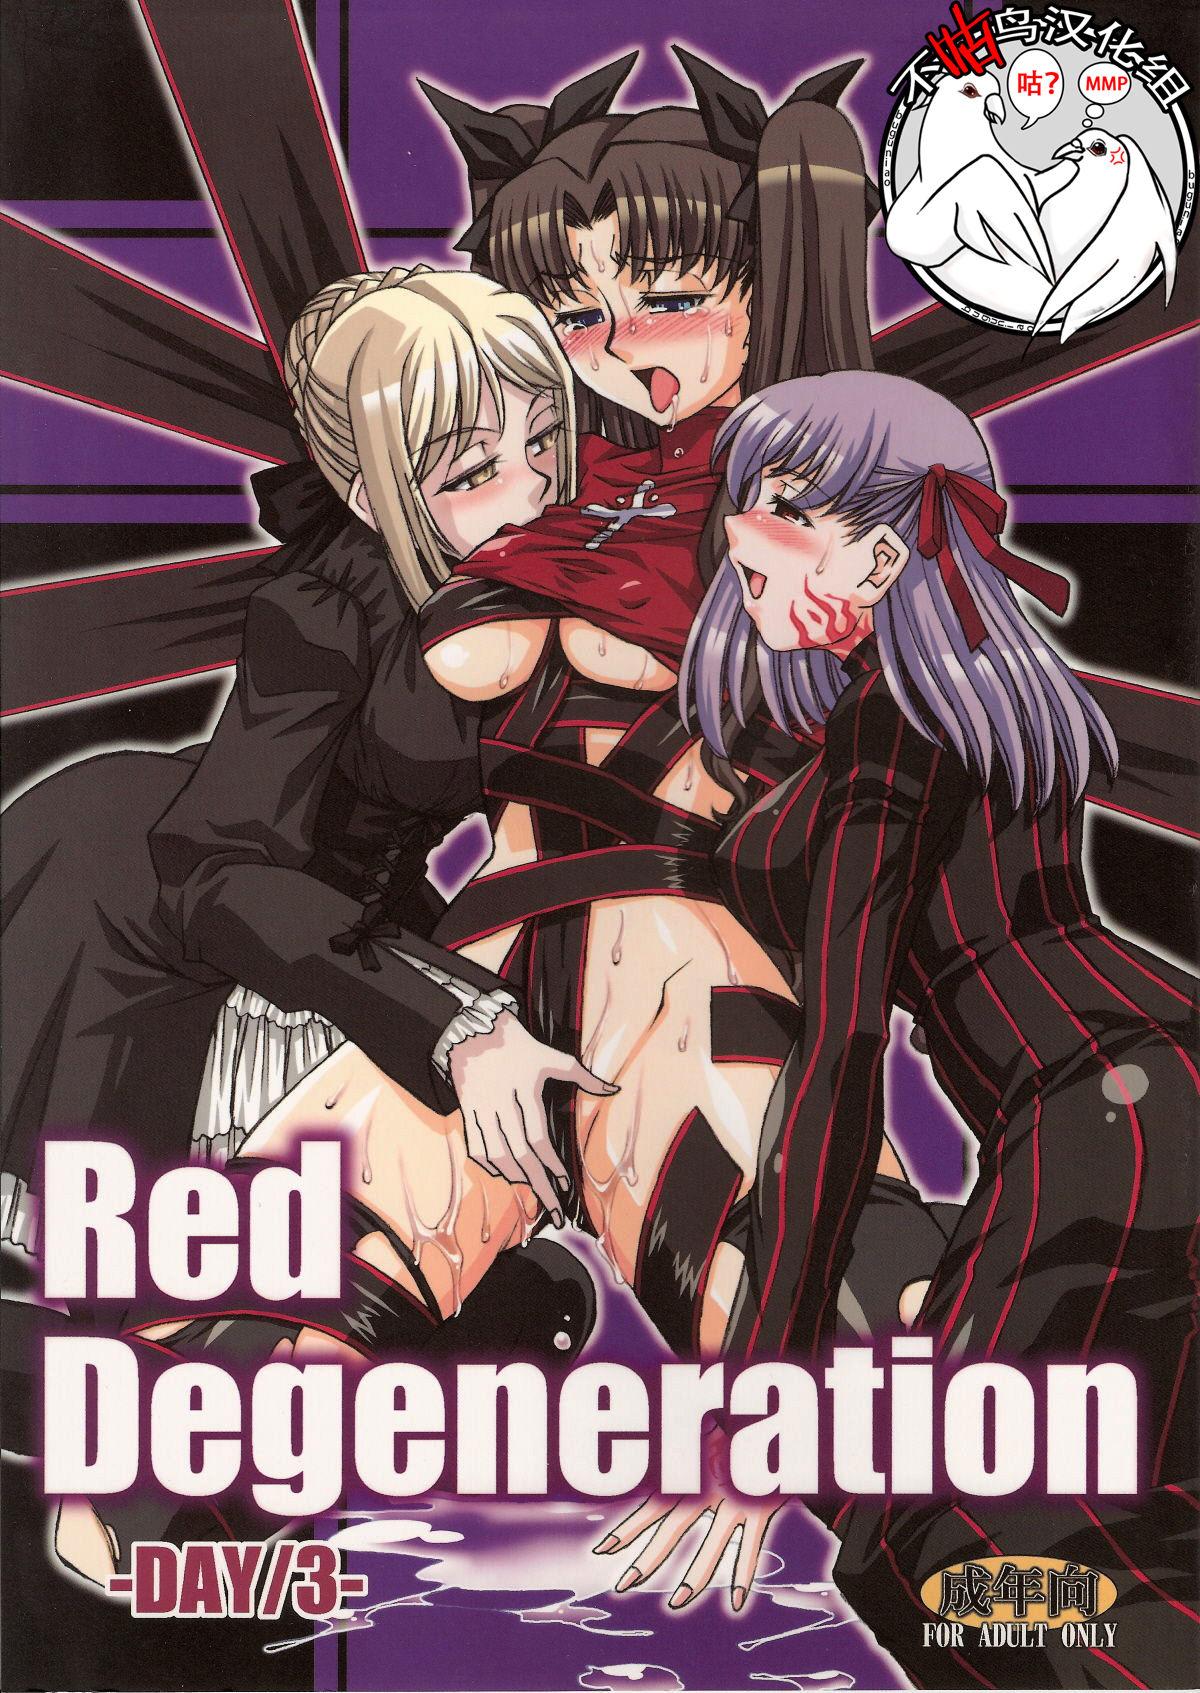 Plumper Red Degeneration - Fate stay night Spycam - Page 1